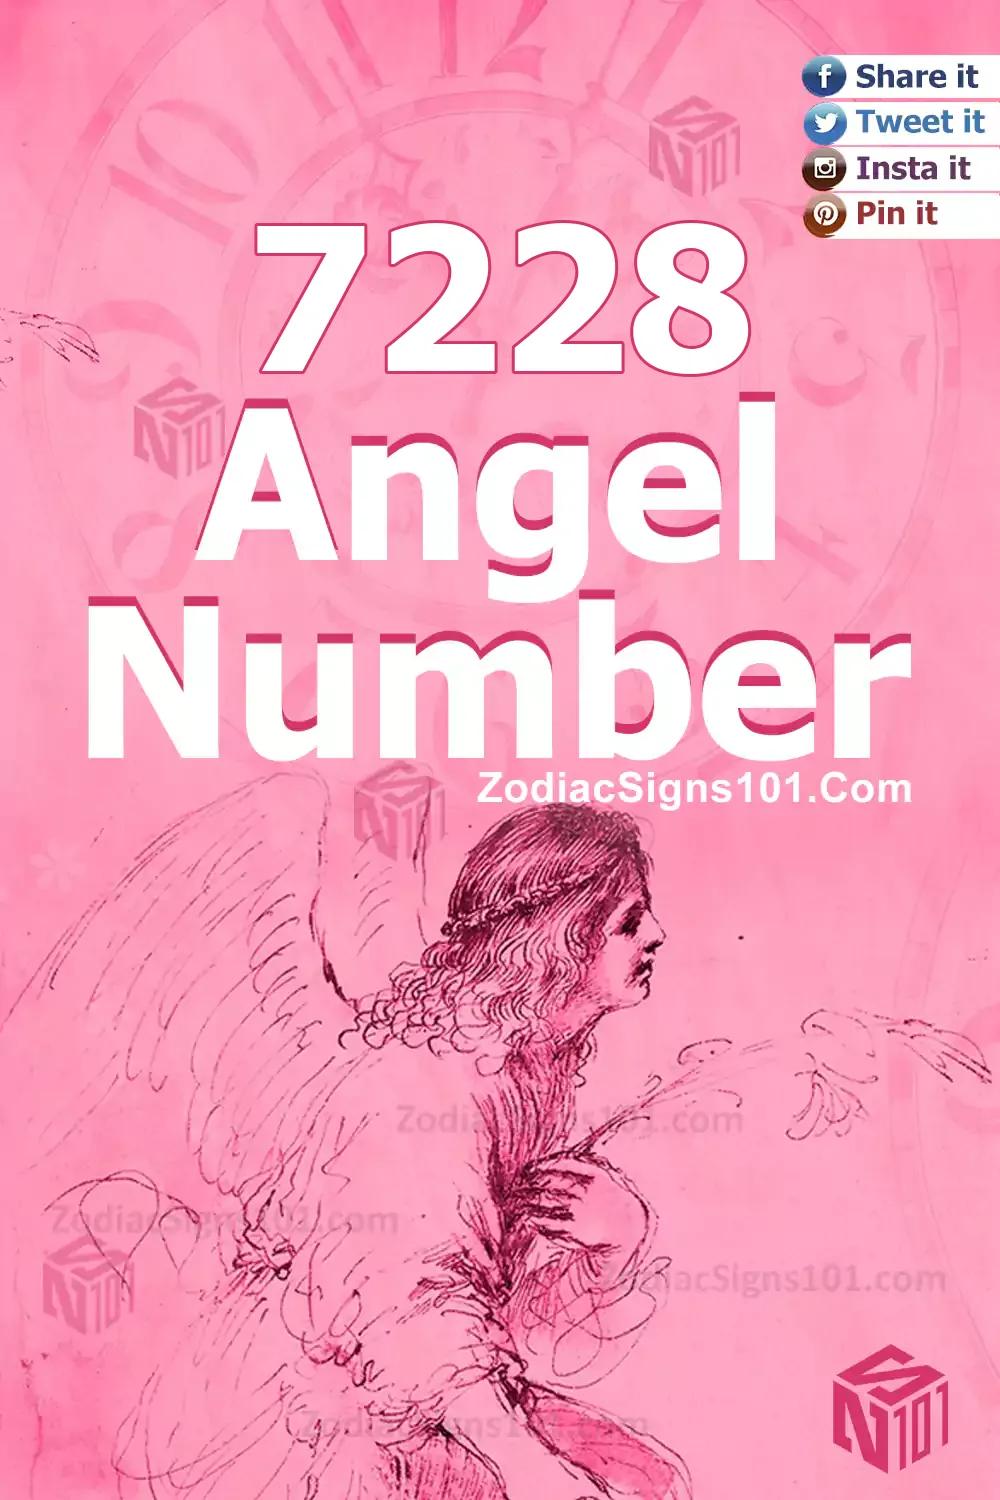 7228 Angel Number Meaning